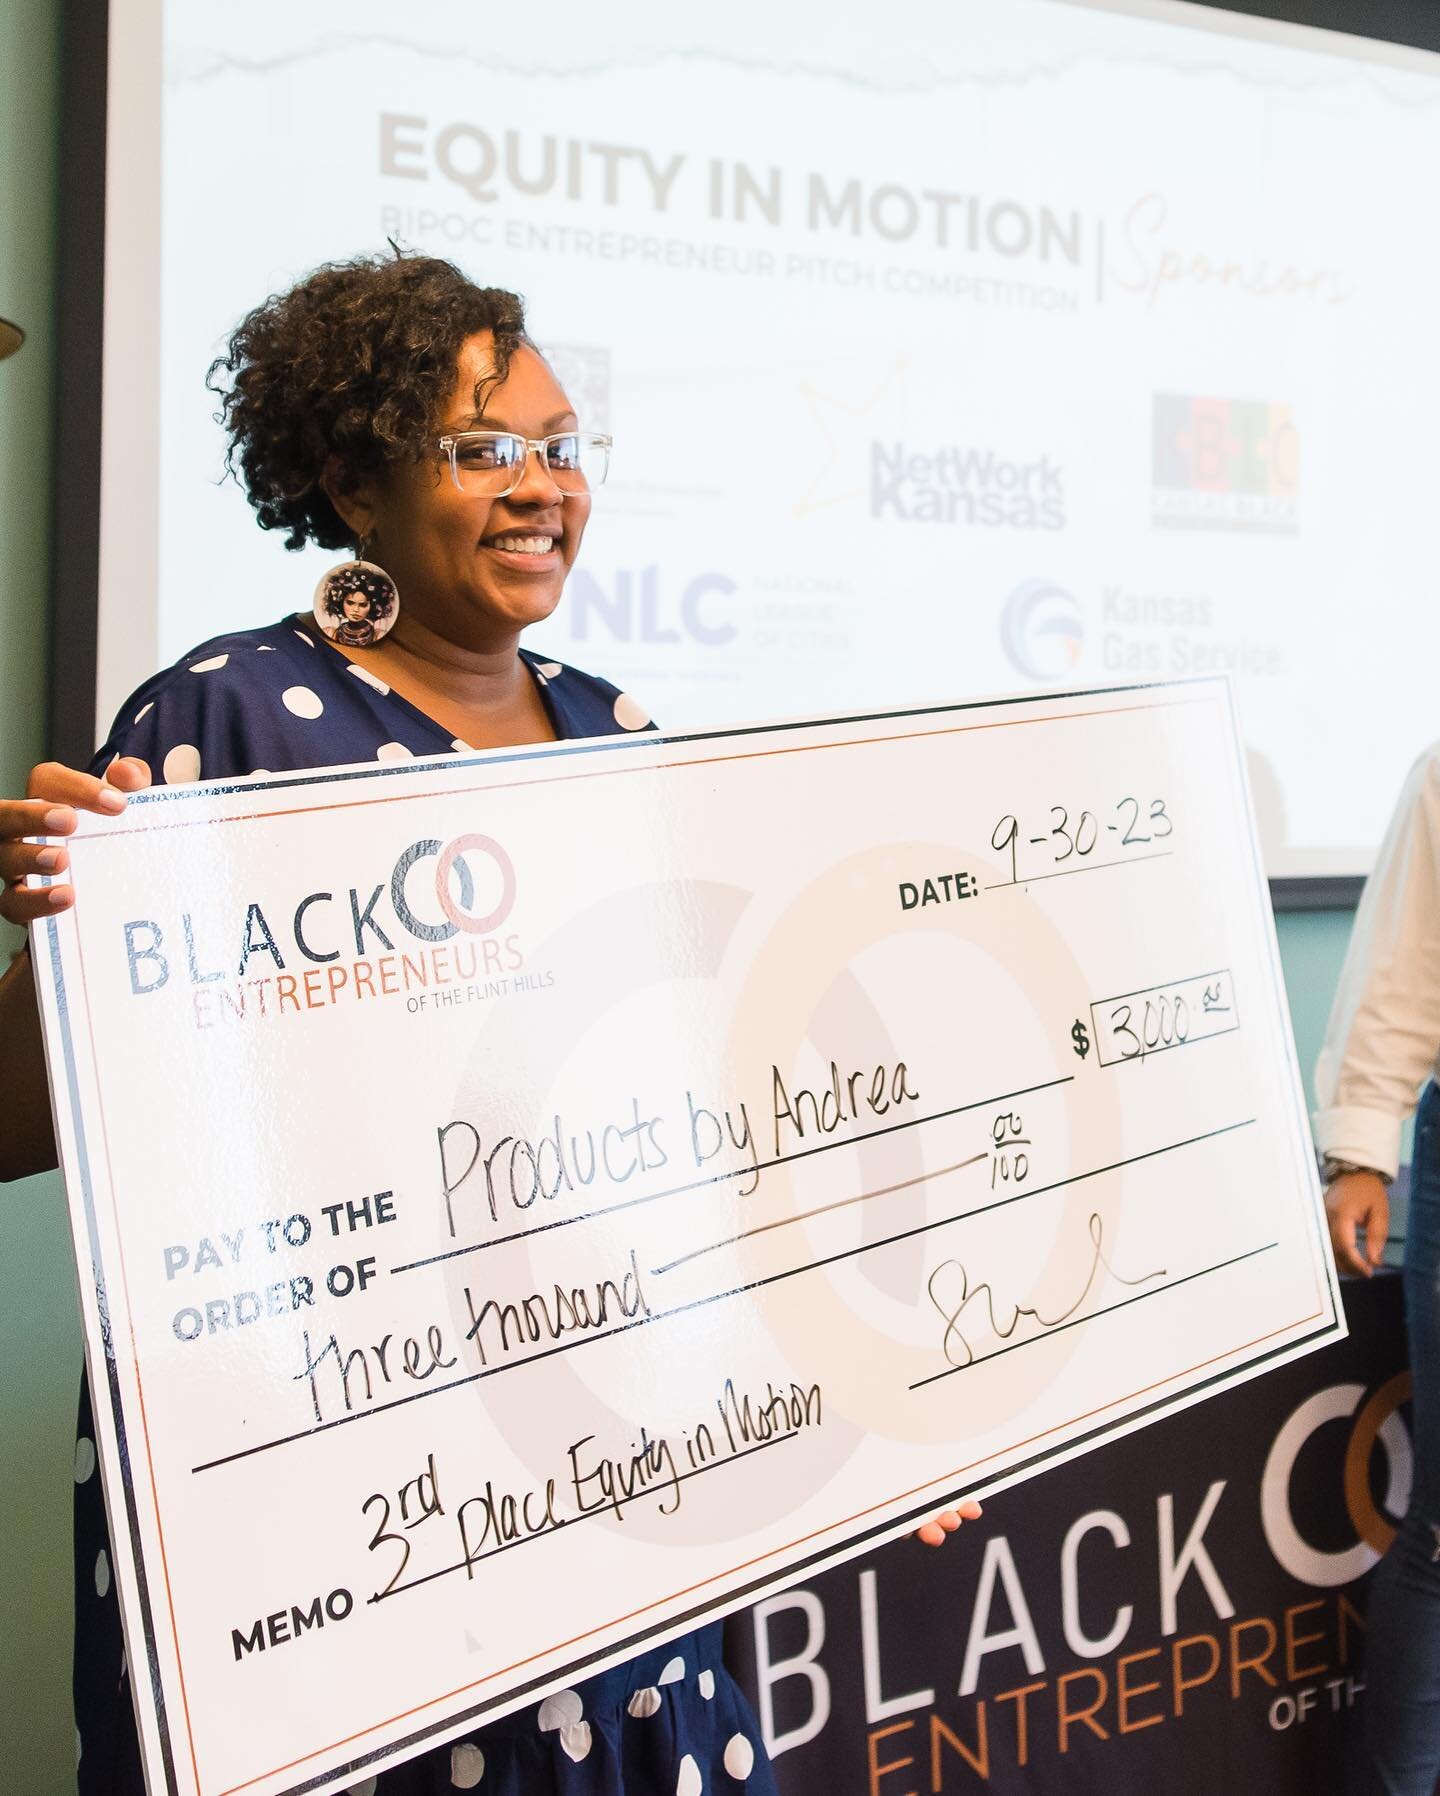 🌟 Breaking Barriers and Winning Hearts! 🏆✨ Andrea Vinson, the powerhouse behind @productsbyandreallc, secured the bag 💰 in our Equity in Motion BIPOC pitch competition. 🚀🌿 Her entrepreneurial journey - proves that dreams have no limits when fuel